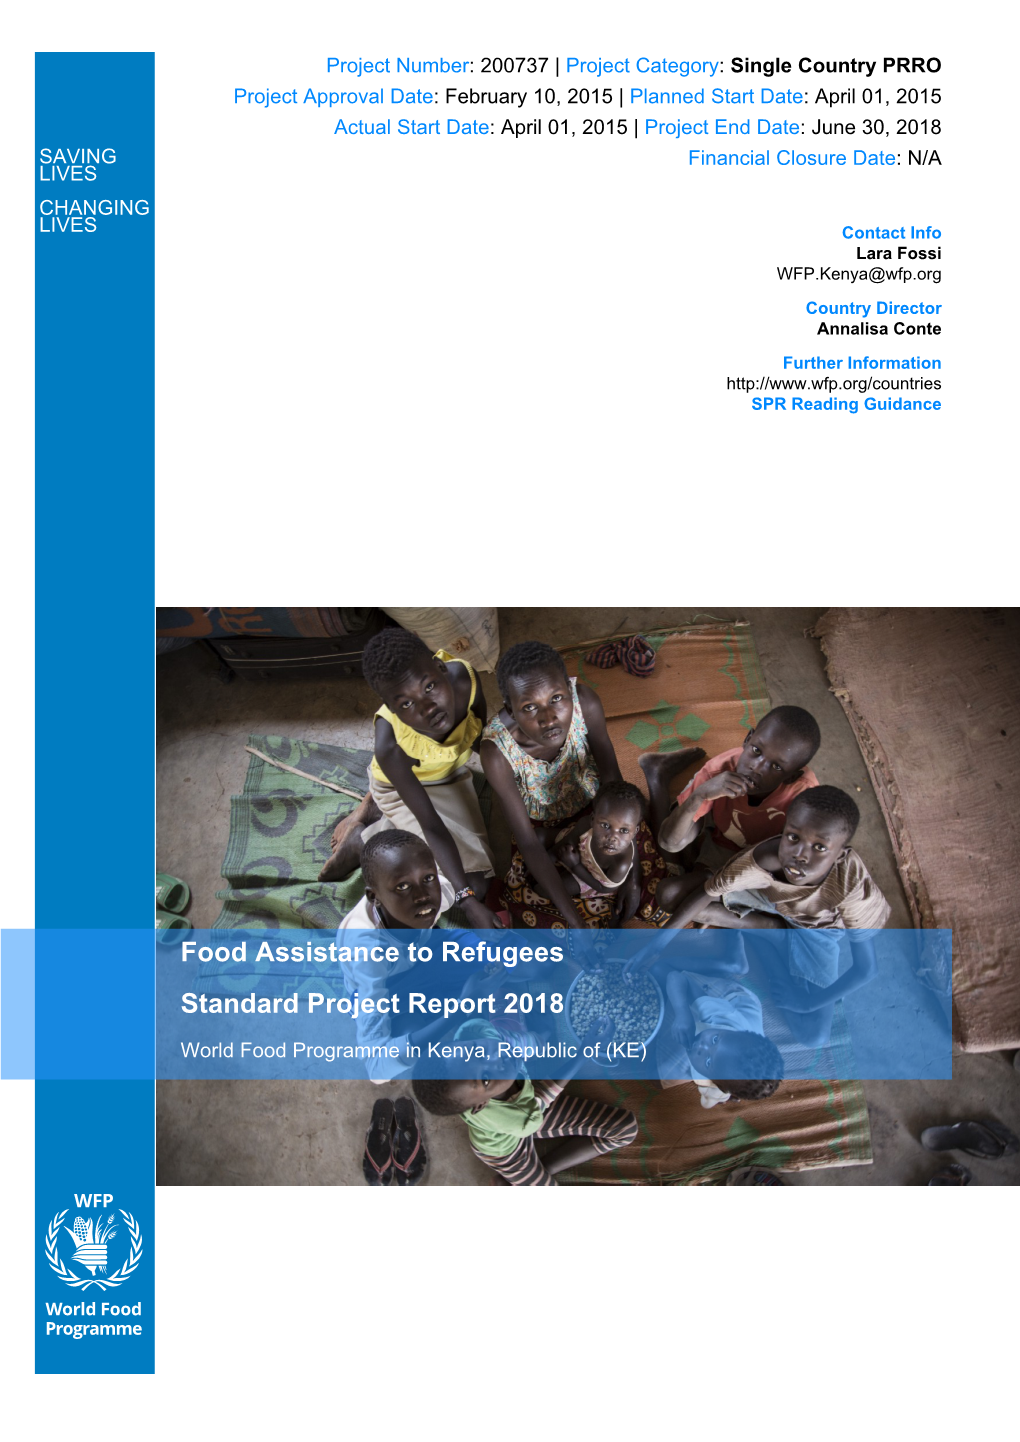 Food Assistance to Refugees Standard Project Report 2018